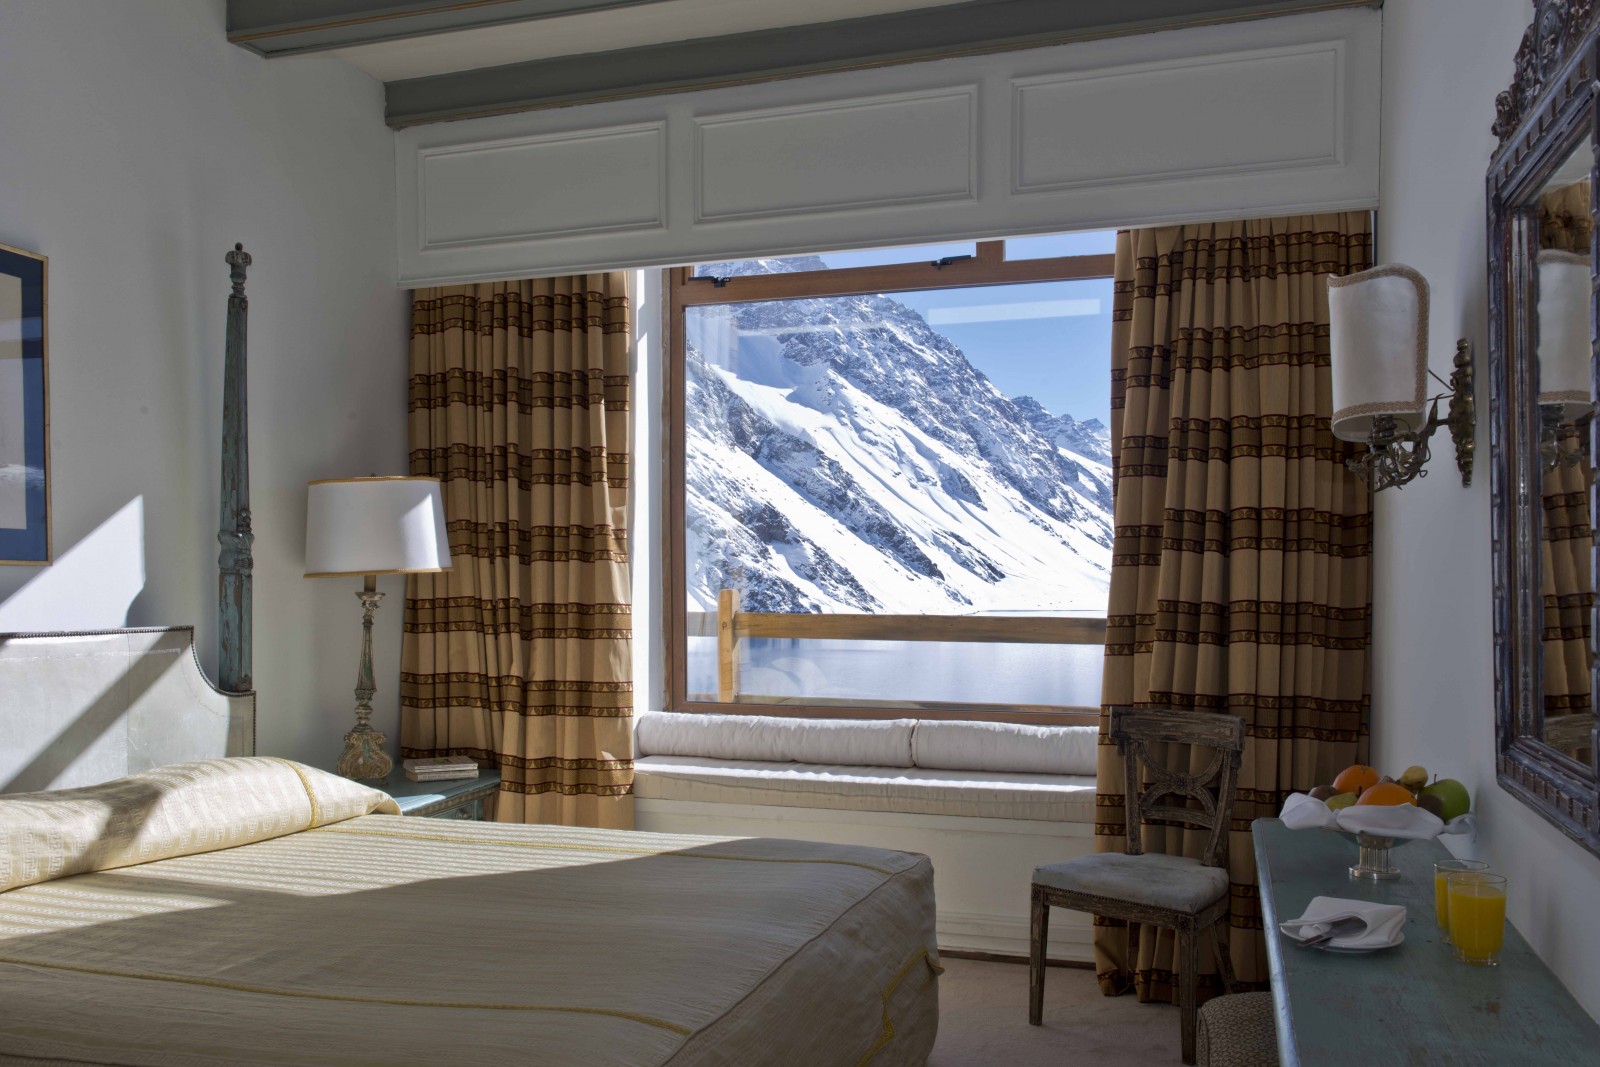 Photo: Hotel Portillo room with a view